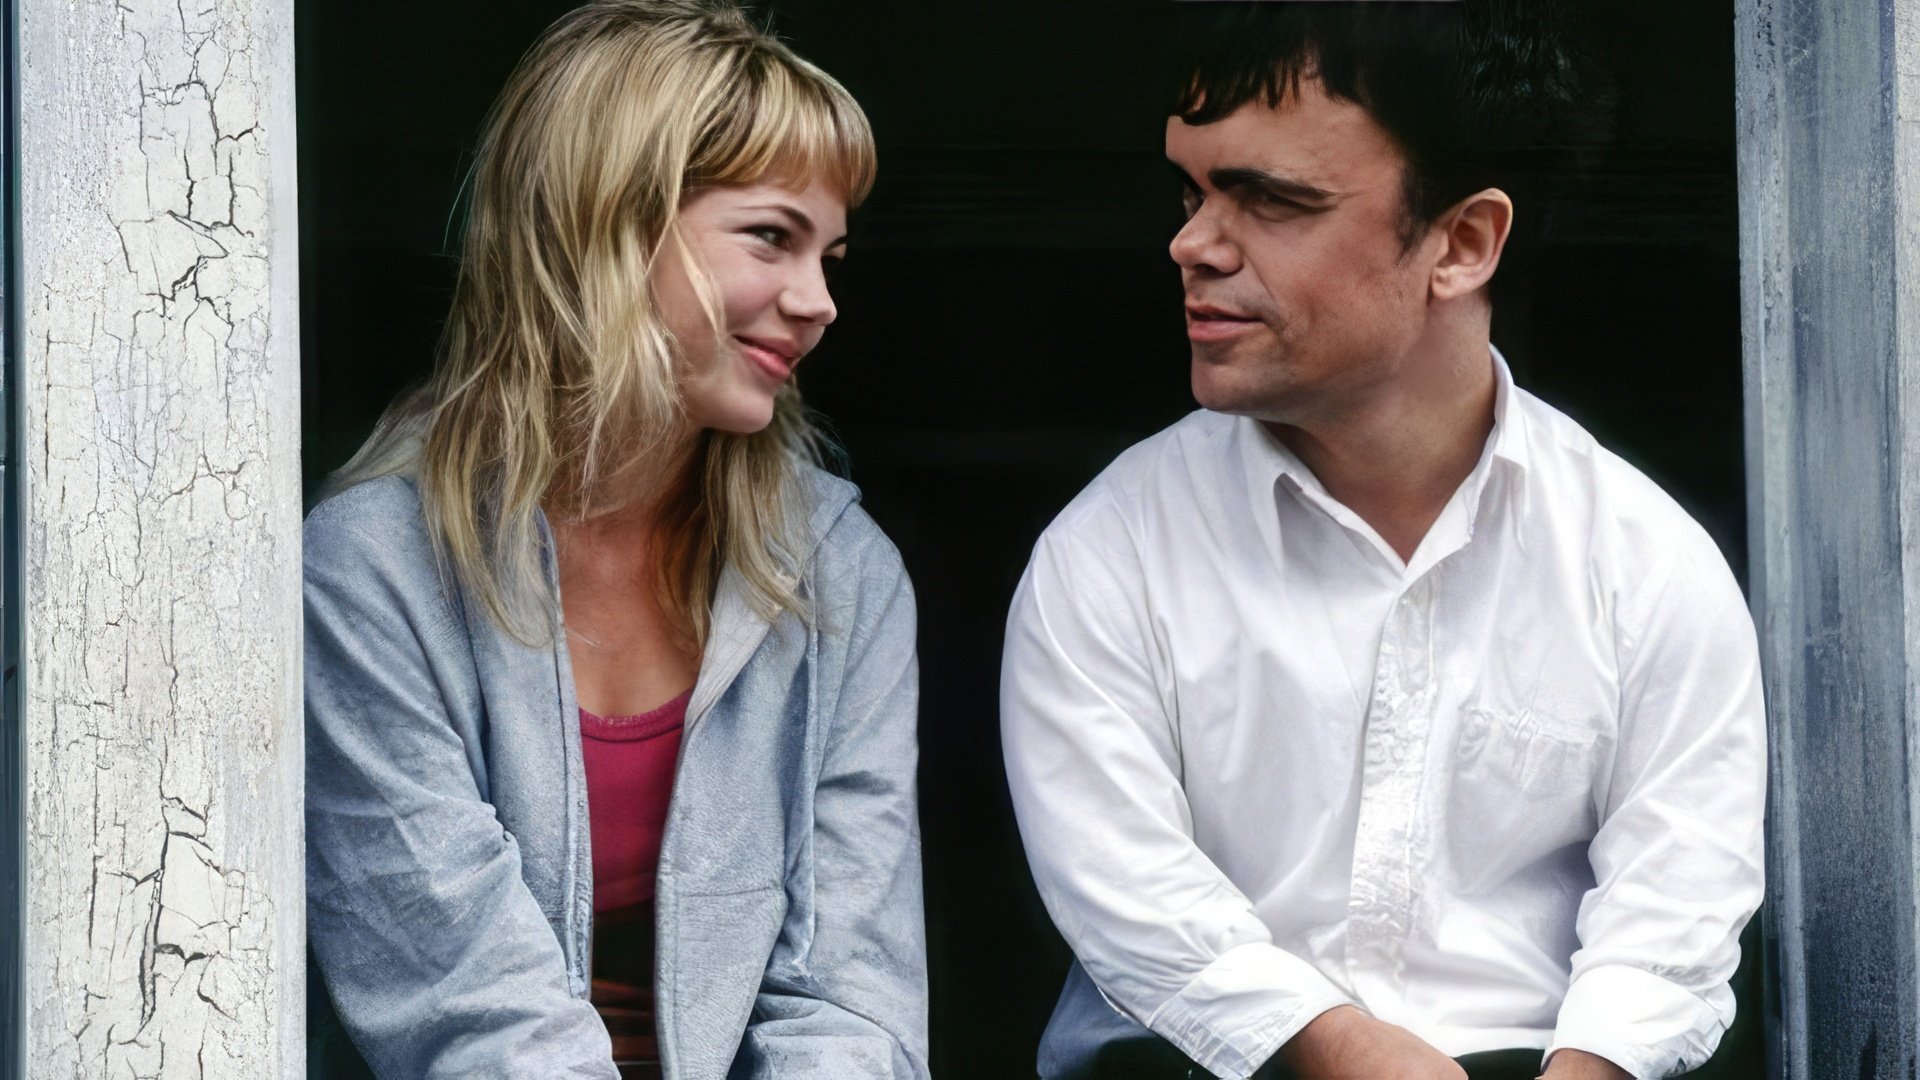 Michelle Williams and Peter Dinklage in The Station Agent